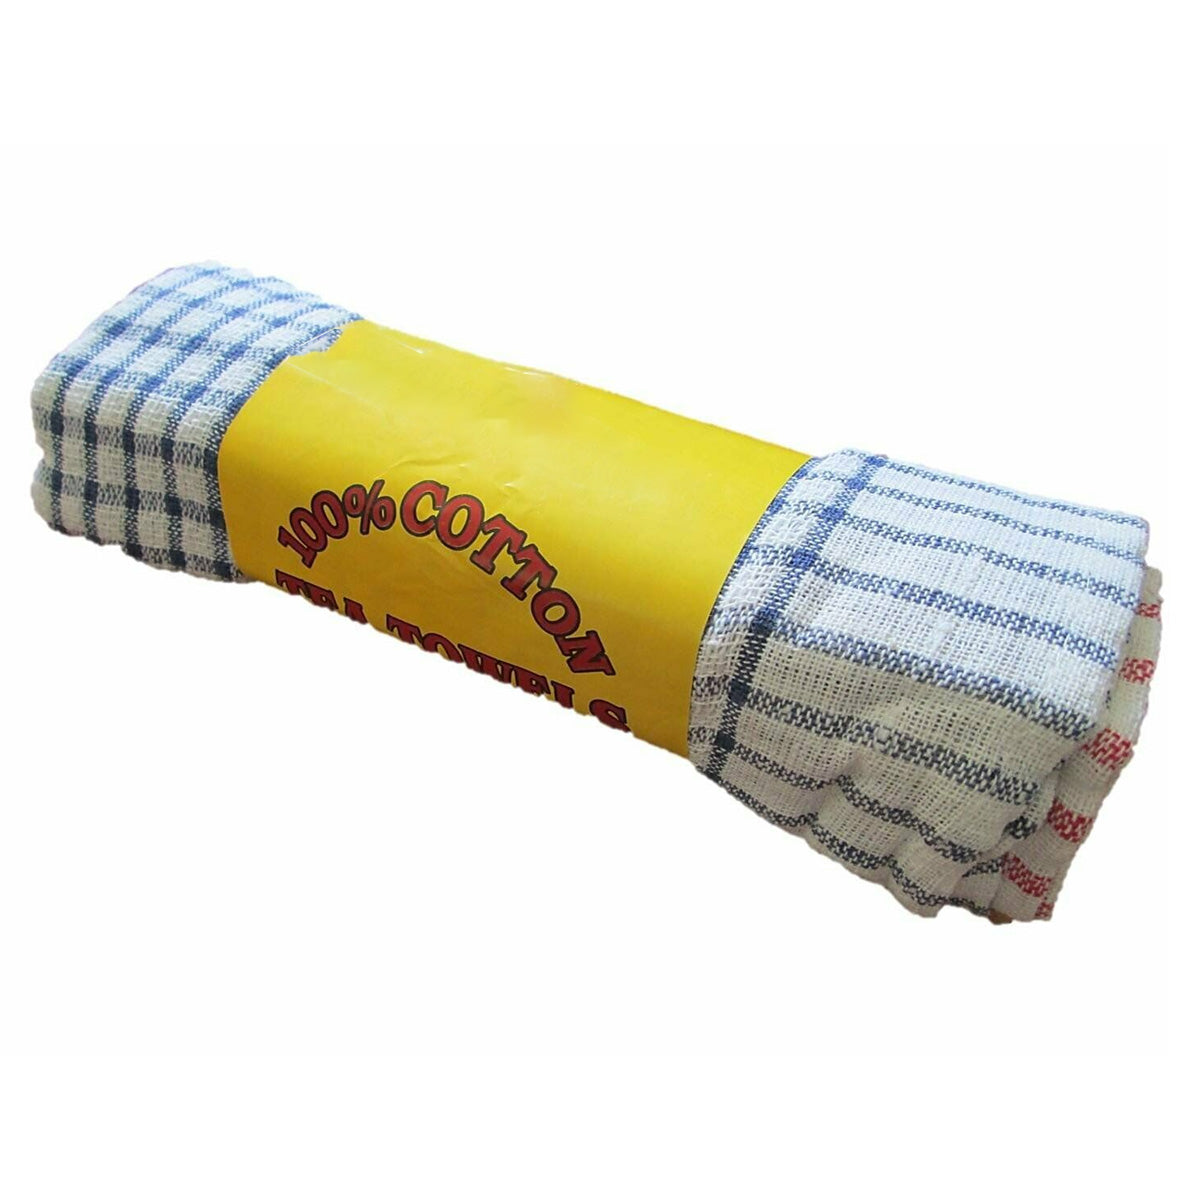 A Continental Food Store Cotton Tea Towels - 3 Pack is rolled up on a white background.